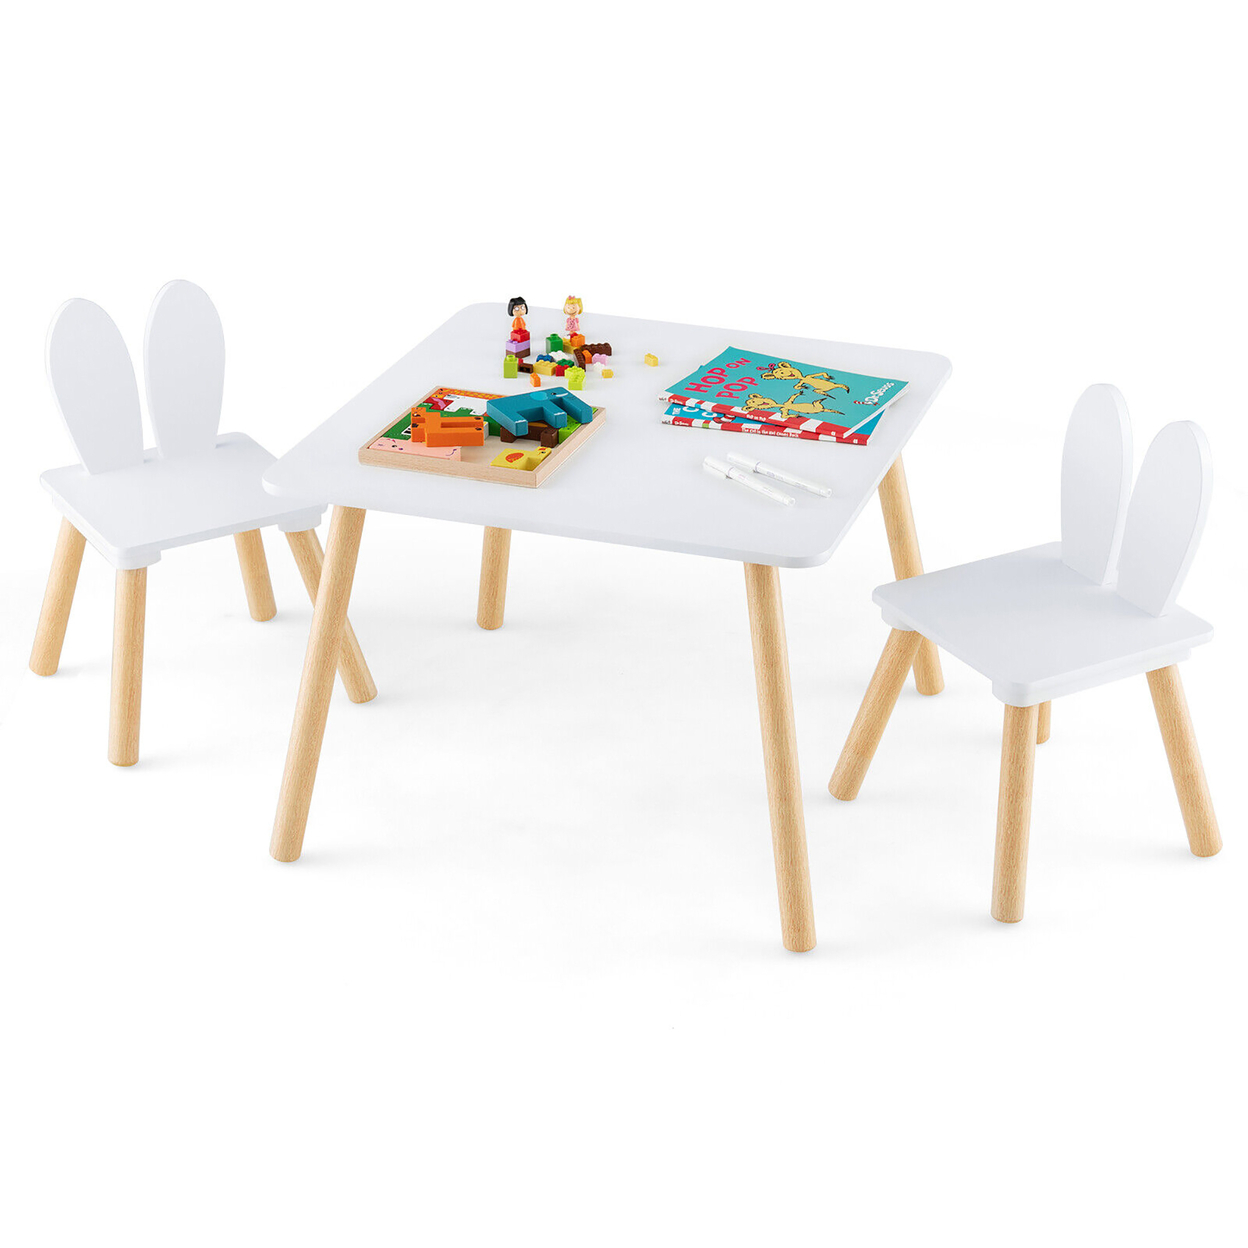 3 Pieces Kids Table & Chairs Set Children Wooden Furniture Set W/Solid Wood Legs